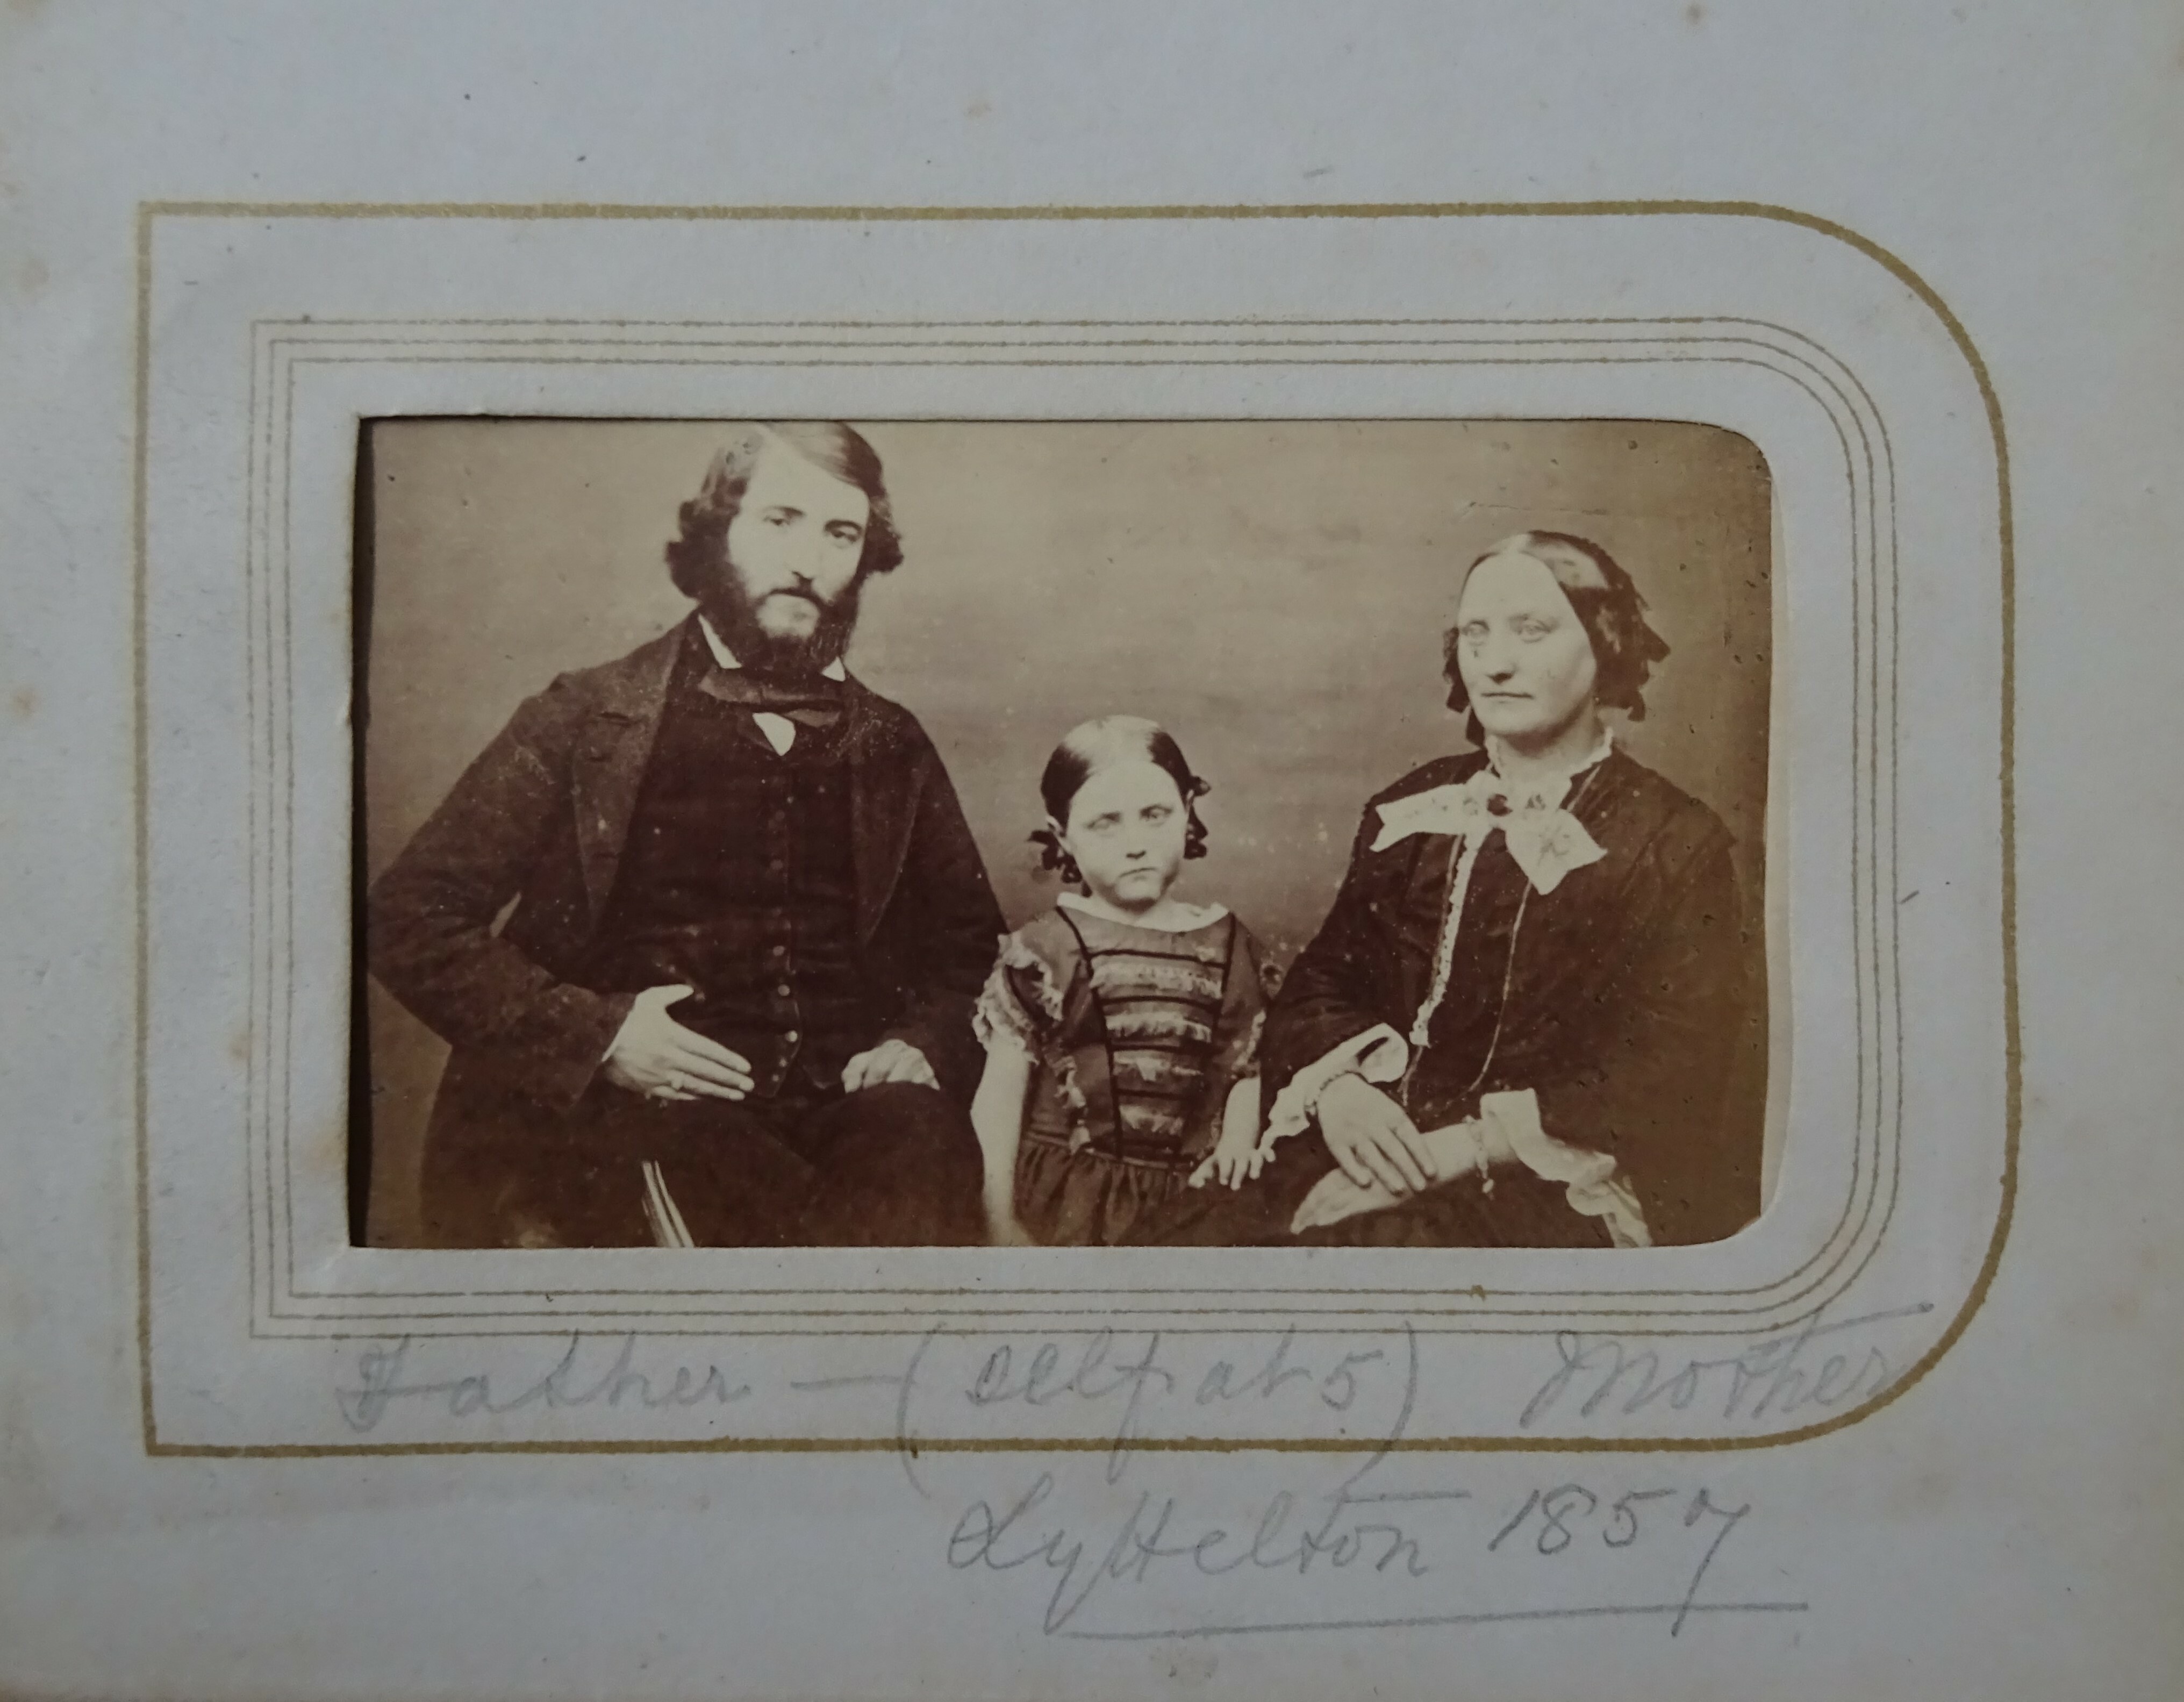 Carte de visite of Mary Annie Hargreaves and her parents. Canterbury Museum 1852.68.1. No known copyright restrictions